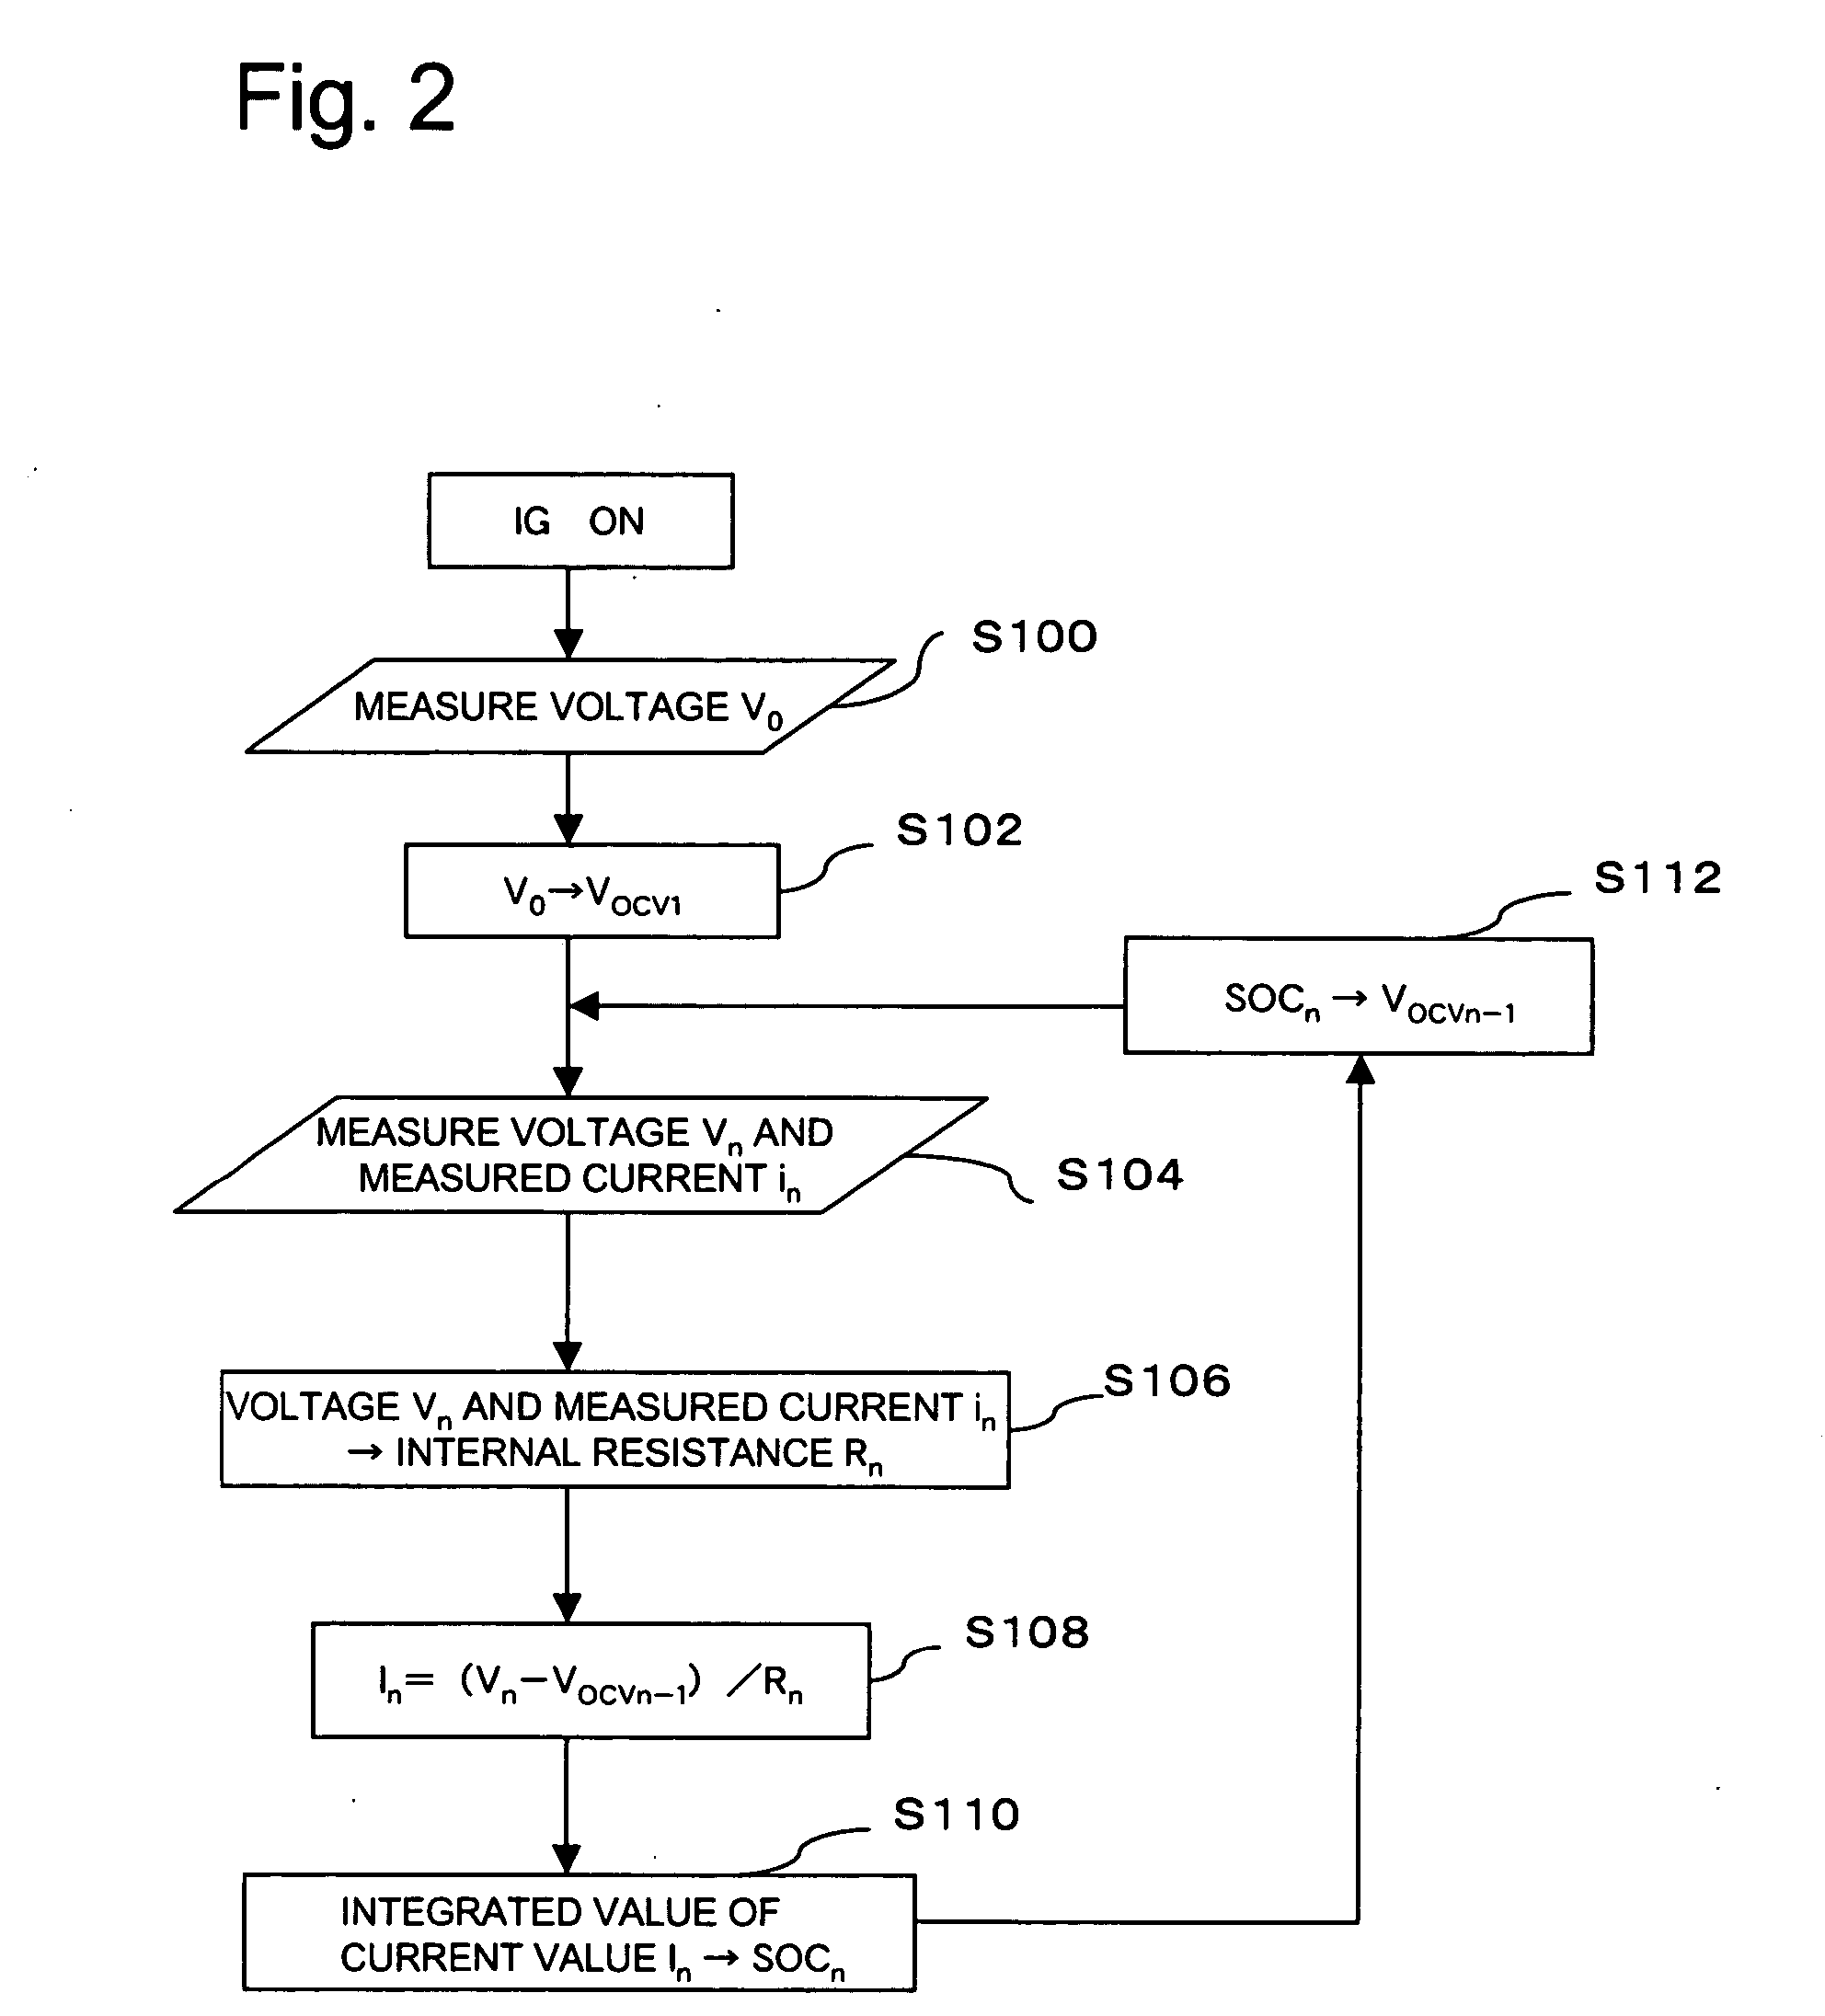 Battery state-of-charge estimator